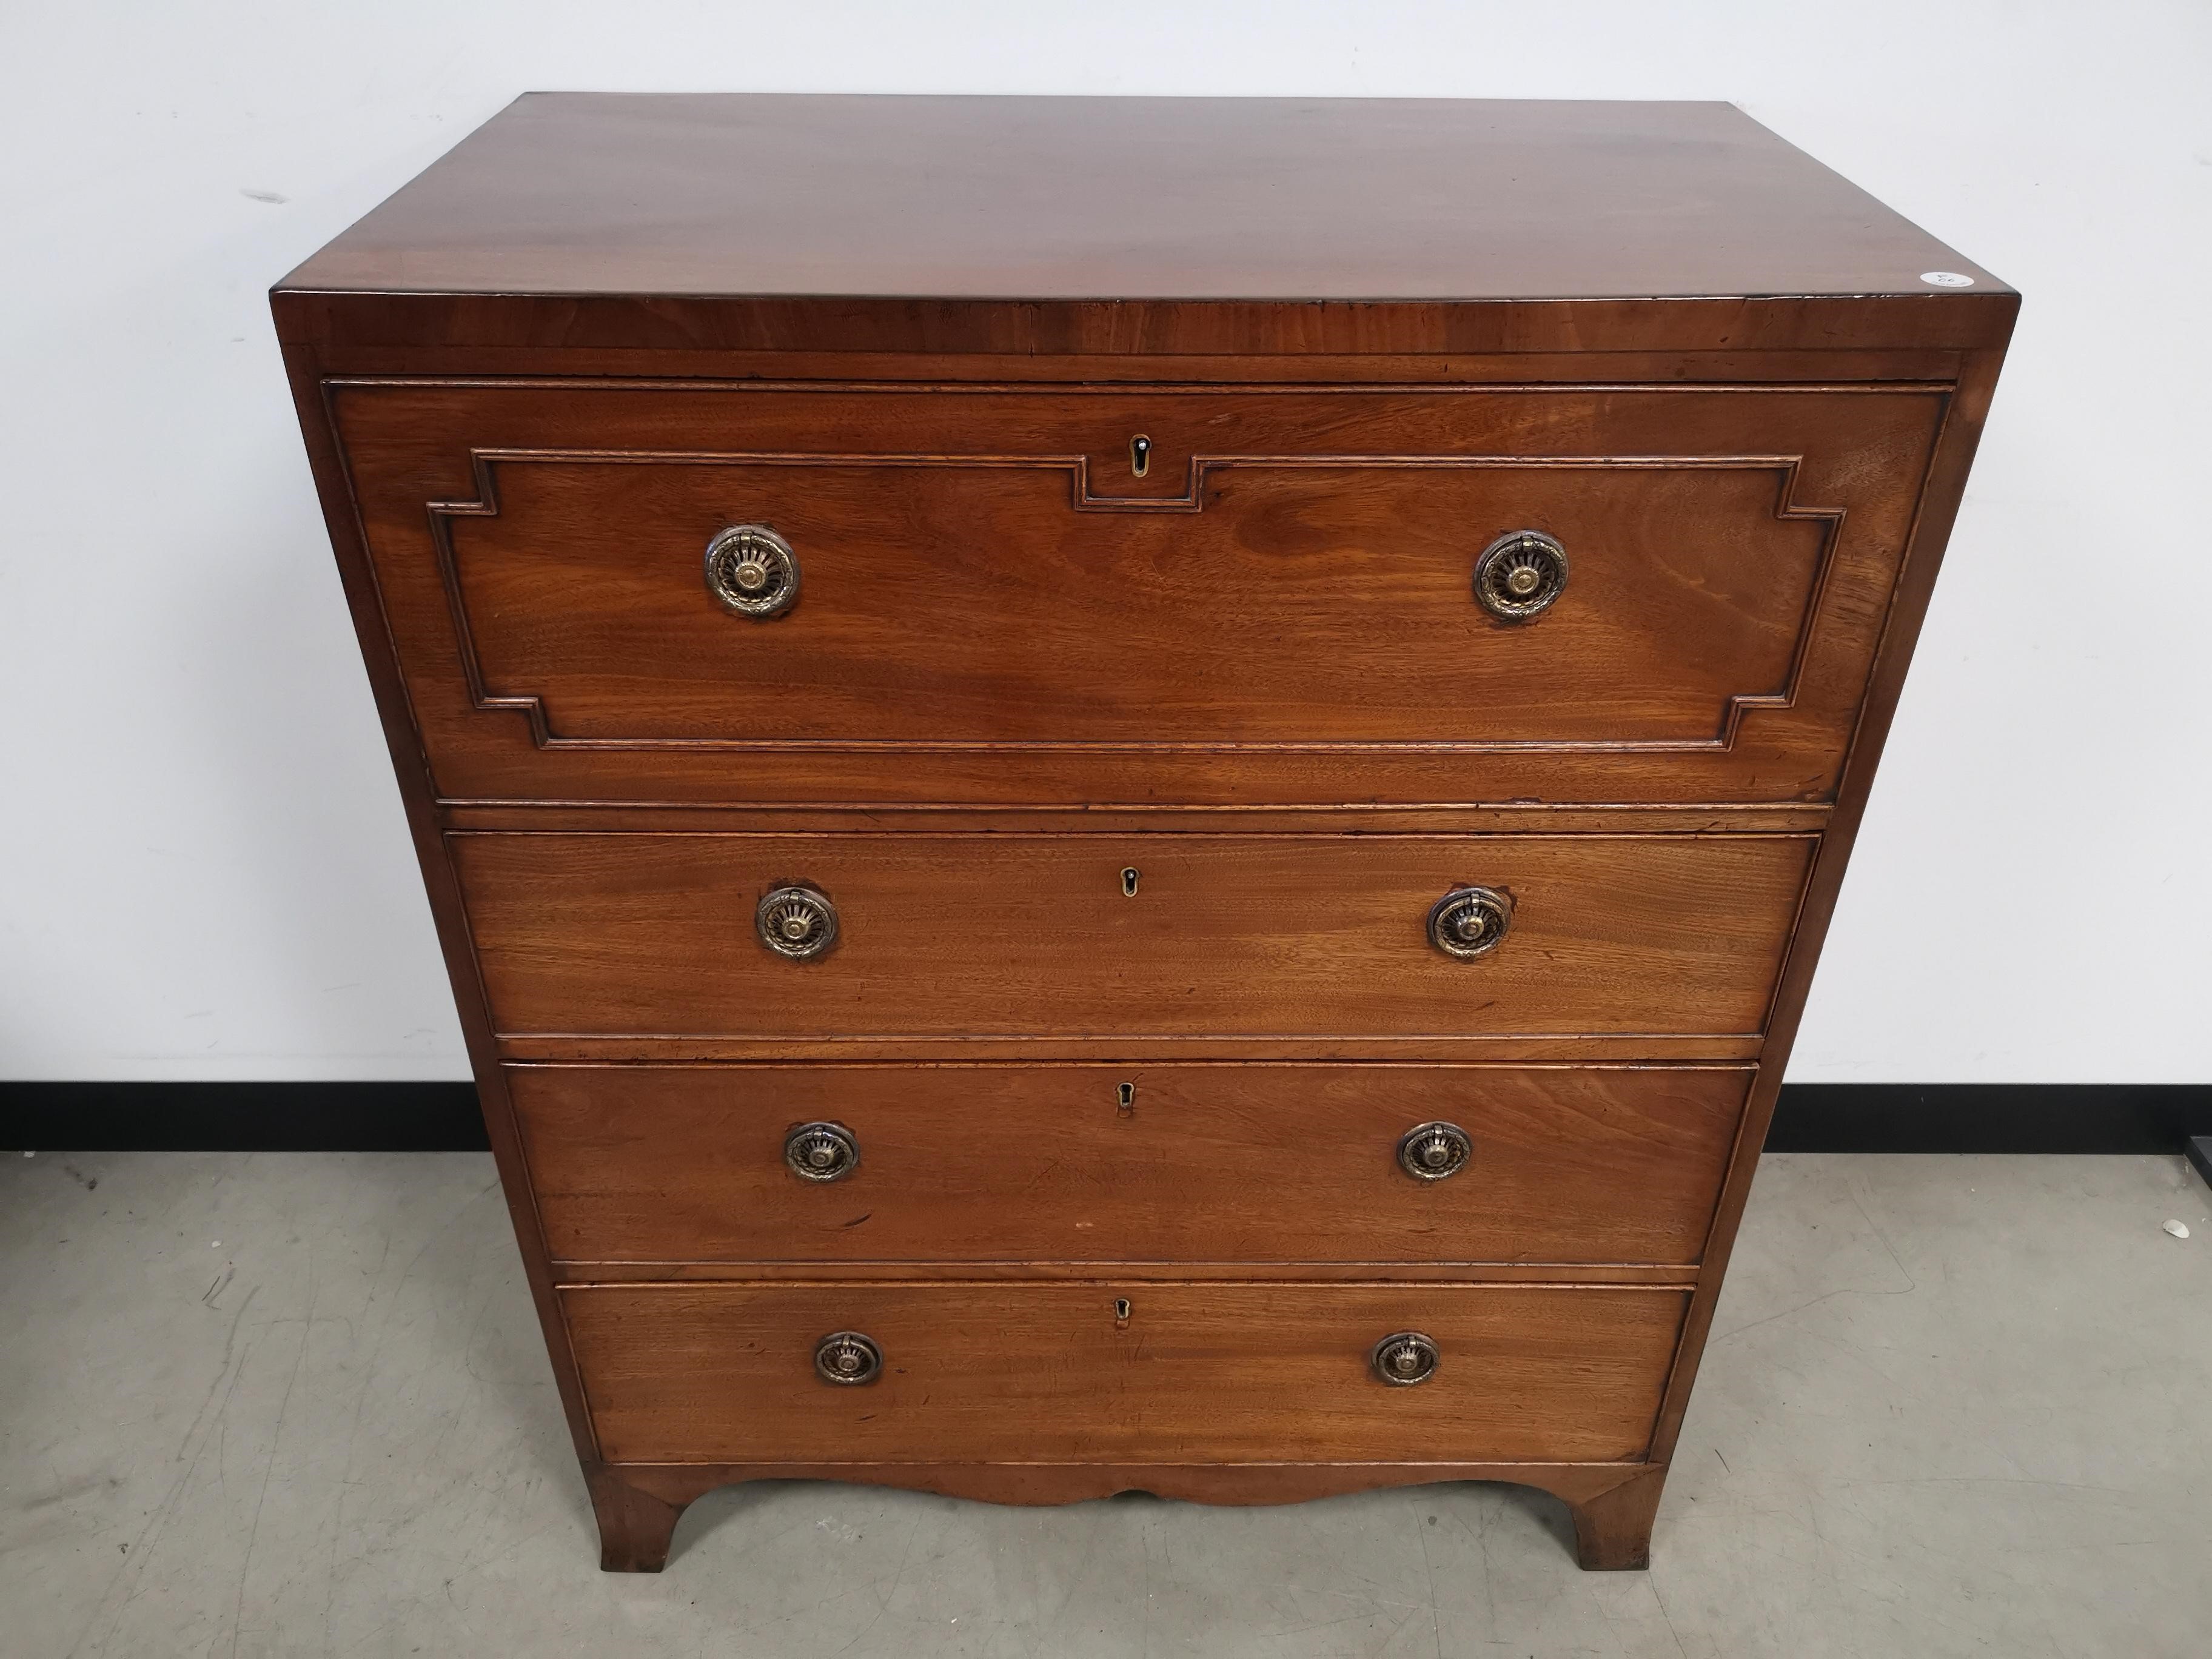 Victorian mahogany secretaire chest of drawers, top secretaire section, three drawers beneath.